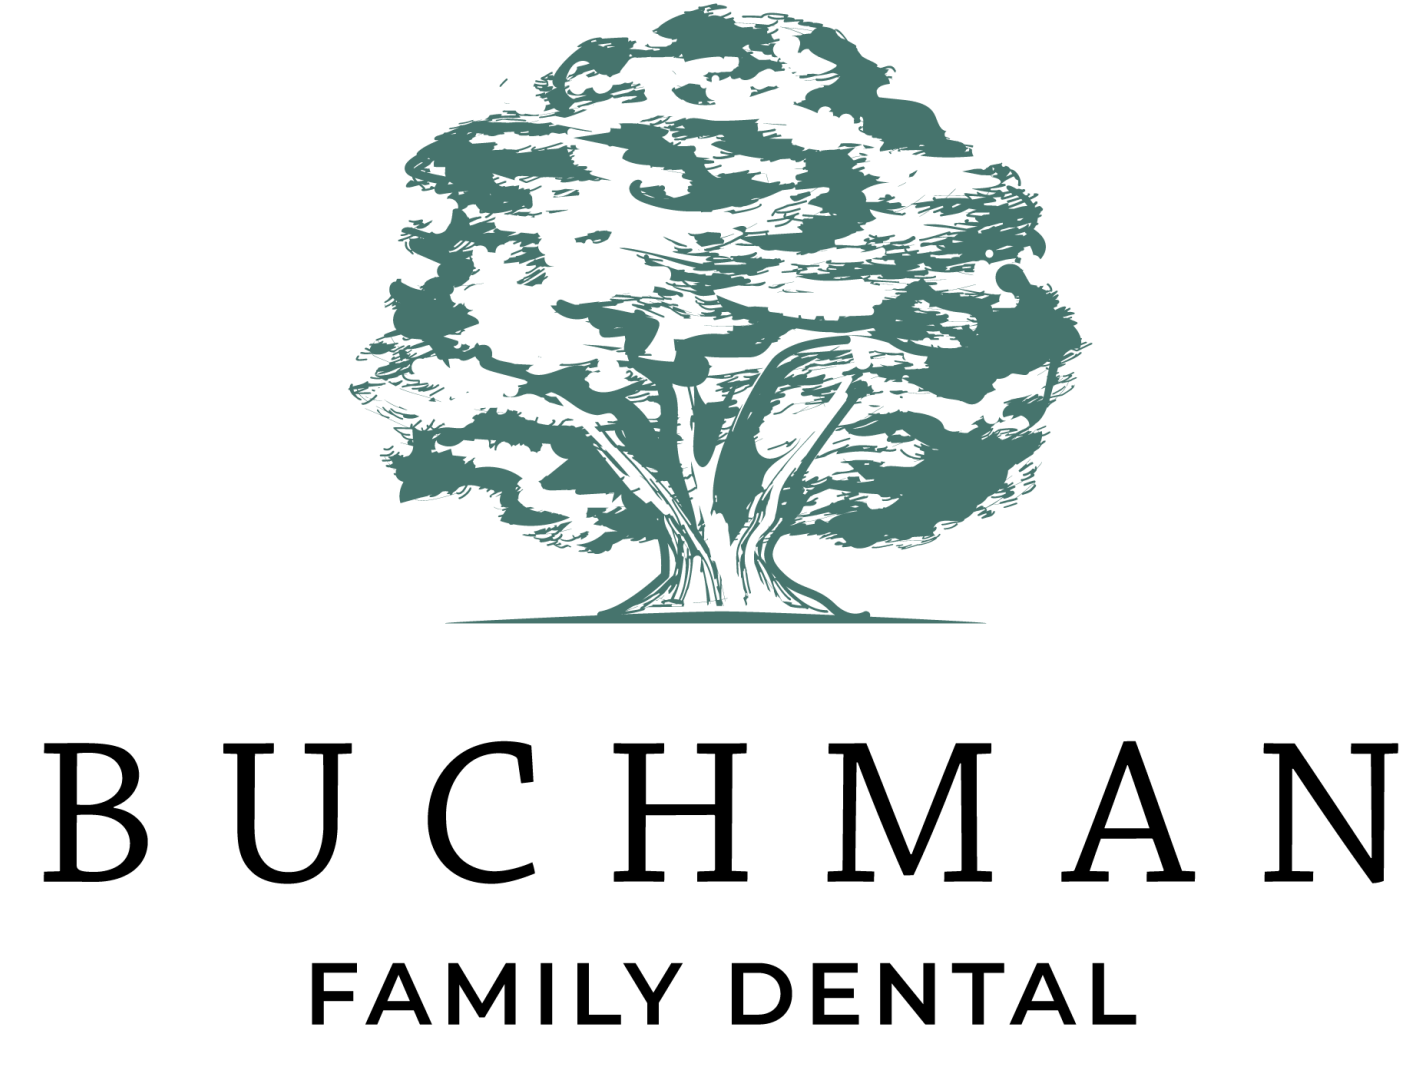 The logo for buckman family dental shows a tree with a lot of leaves.